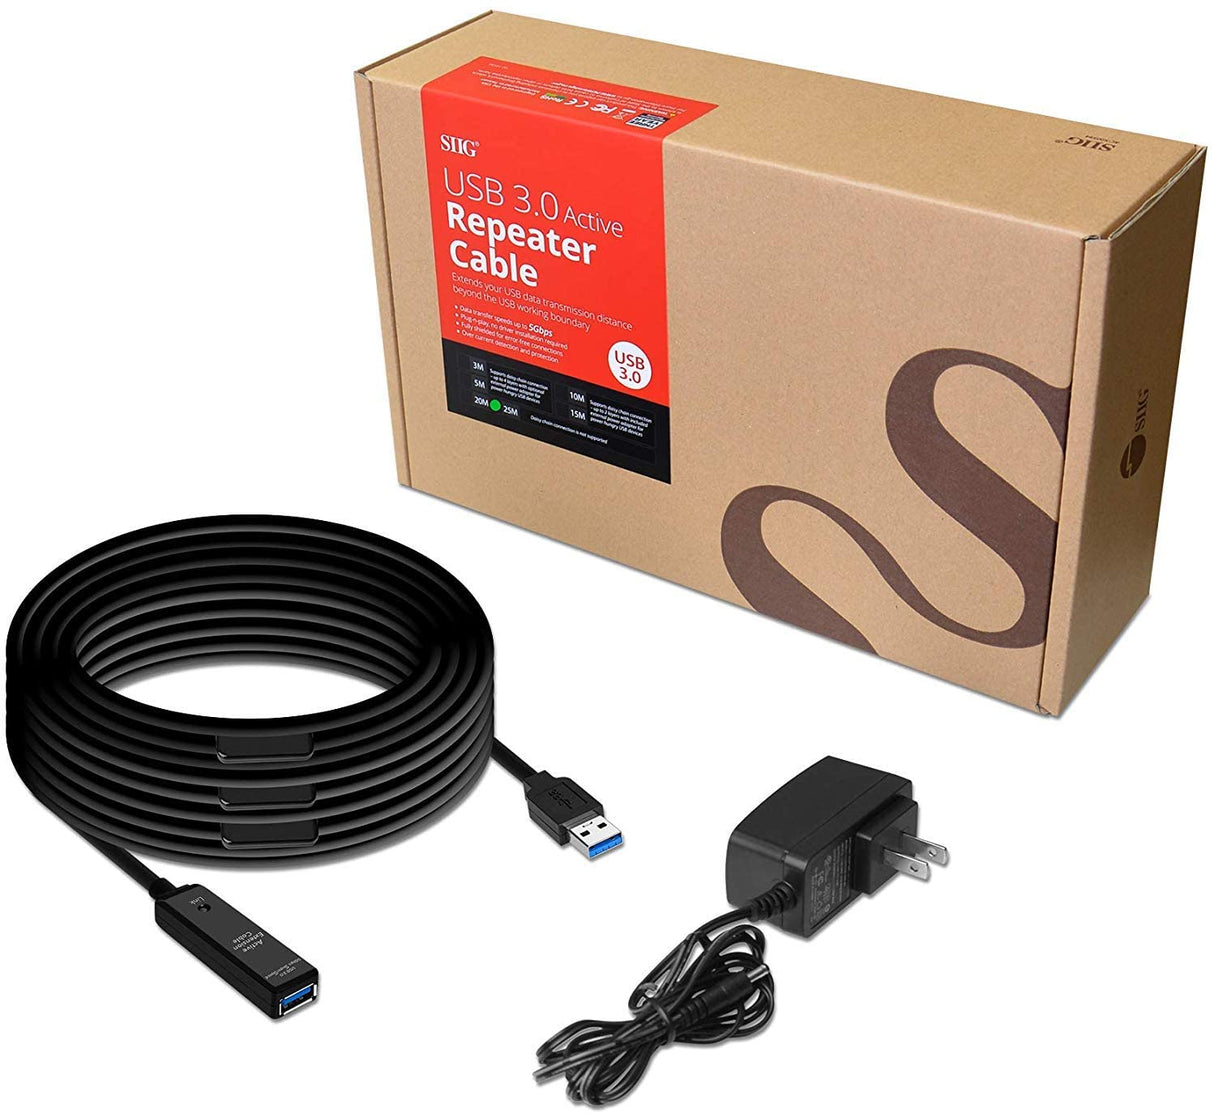 SIIG USB 3.0 Active Repeater Cable 25-Meters - Active Extension Cable (JU-CB0D11-S1)